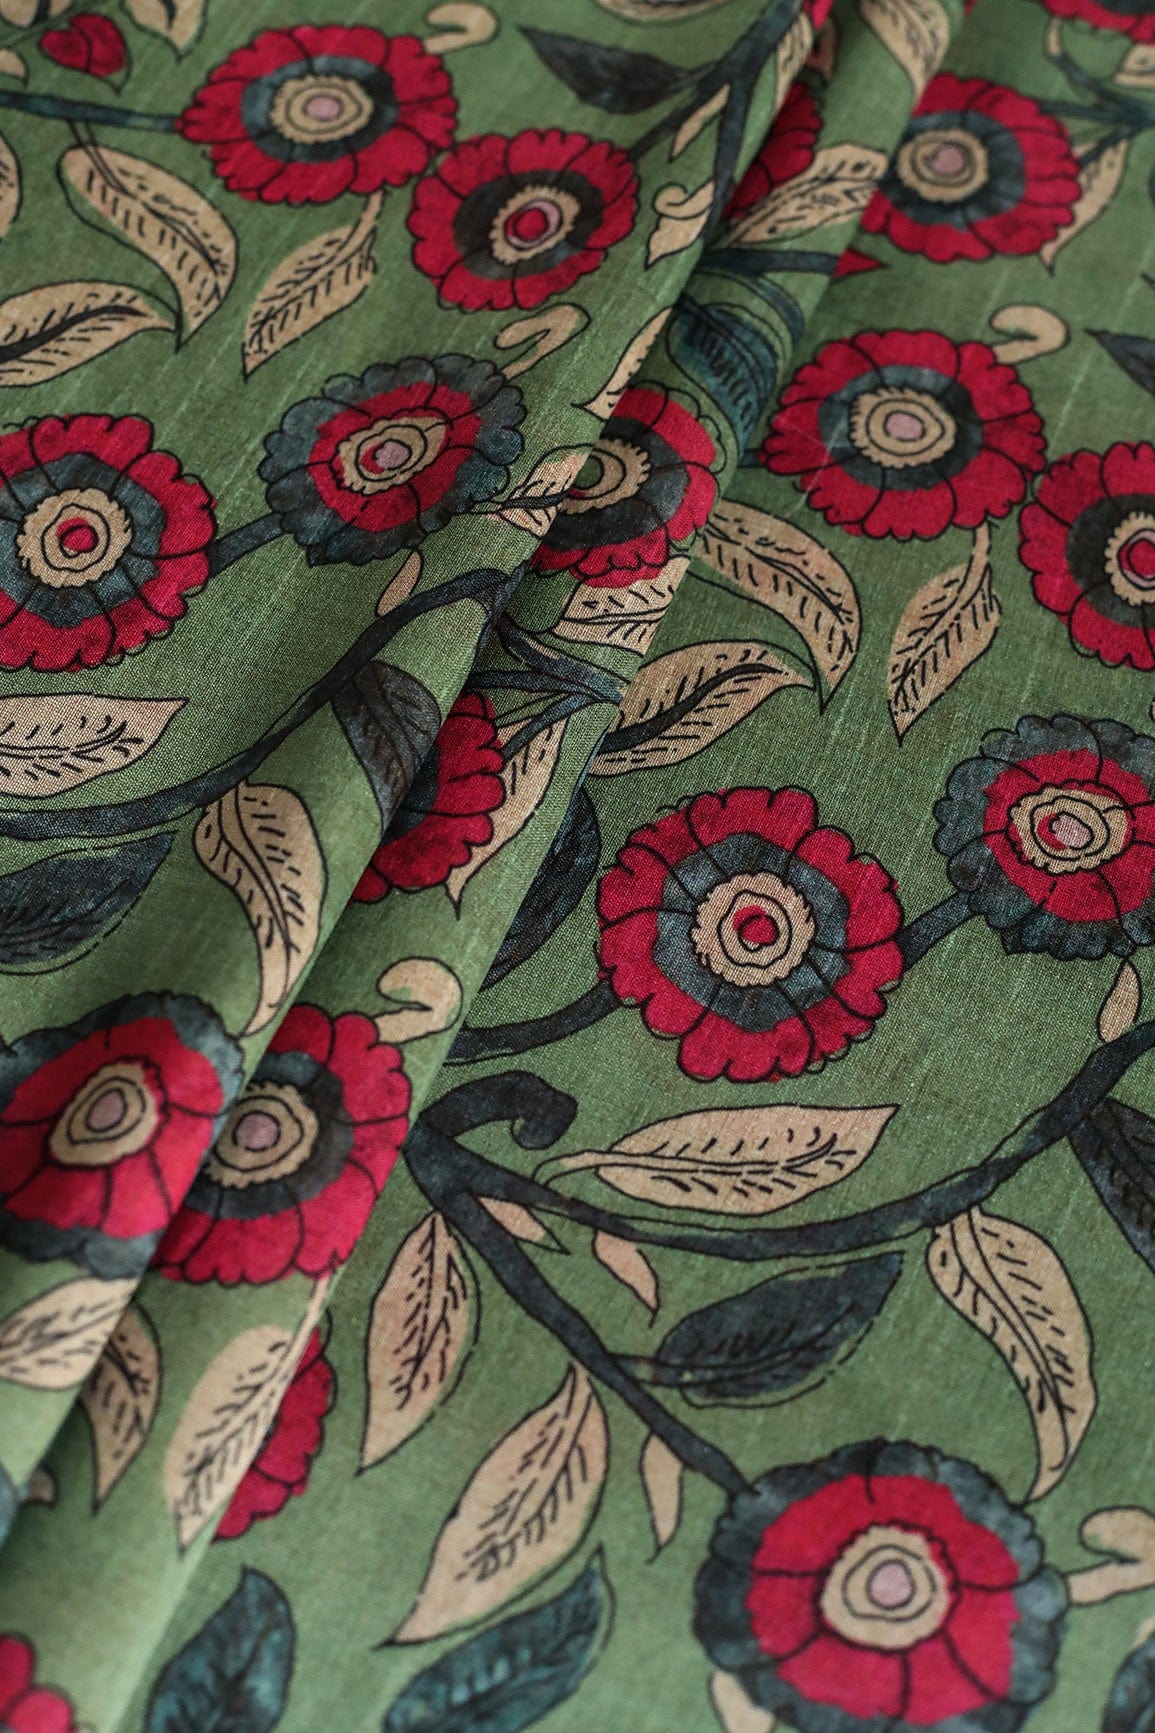 doeraa Prints Olive Green And Red Floral Pattern Digital Print On Mulberry Silk Fabric